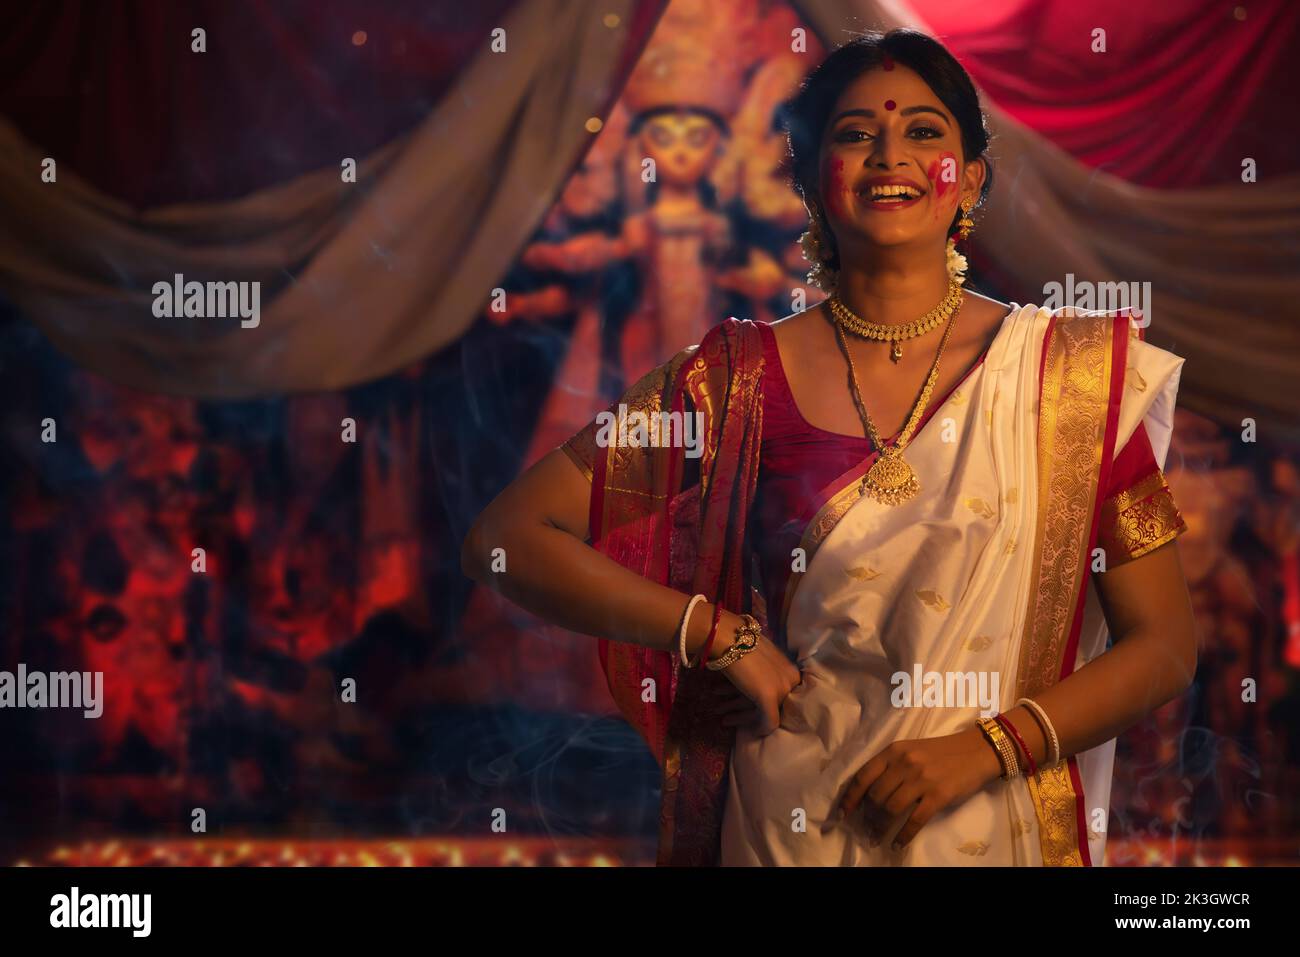 Portrait of a married Bengali woman with sindoor on face Stock Photo